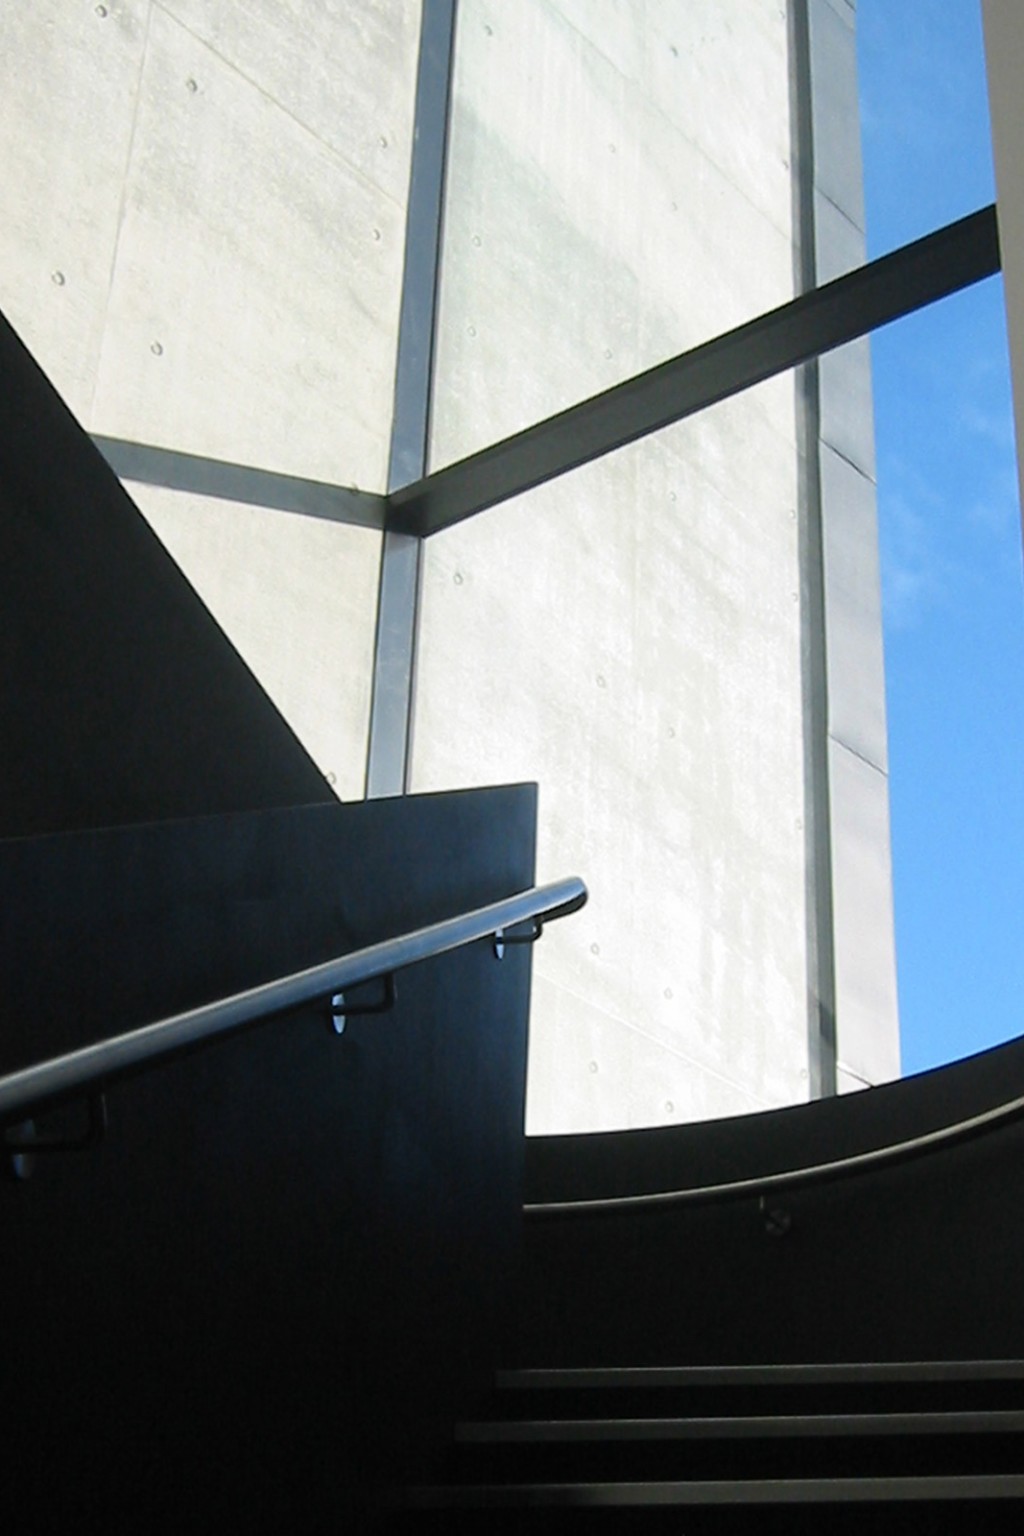 Towner Gallery Staircase 2